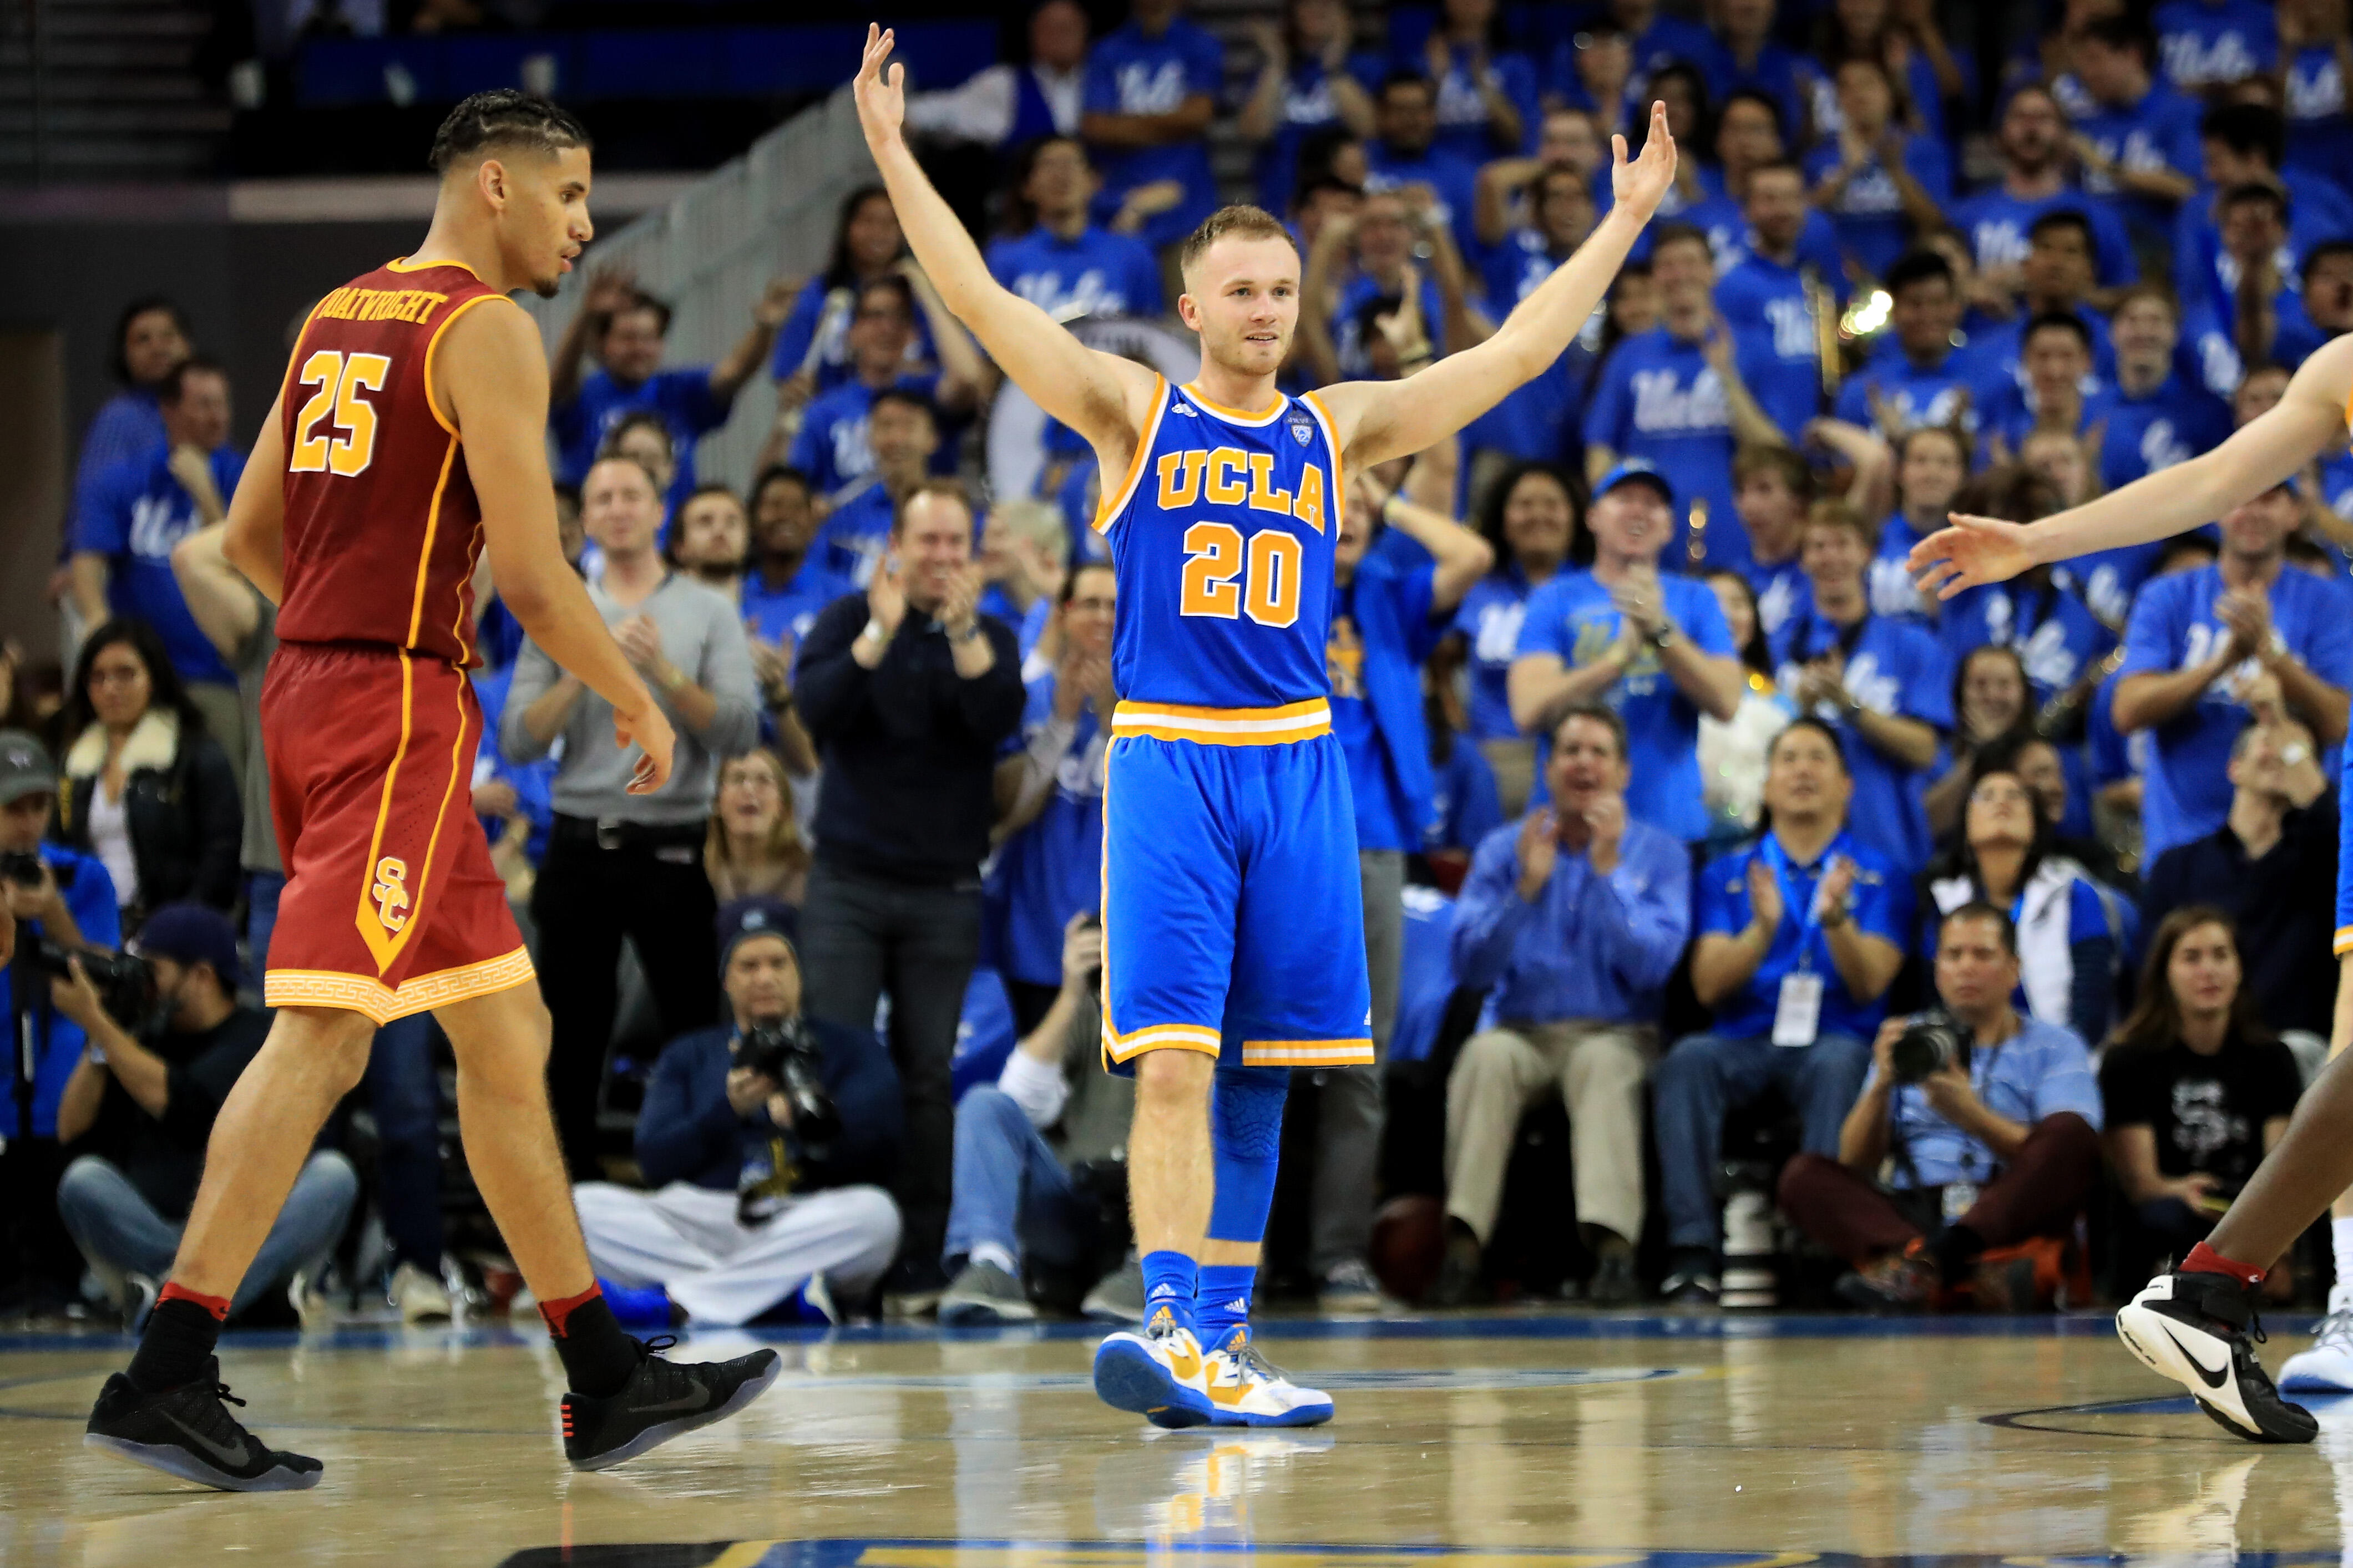 LOS ANGELES, CA - FEBRUARY 18:  Bryce Alford #20 of the UCLA Bruins reacts to a shot as Bennie Boatwright #25 of the USC Trojans loks on during the second half of a game at Pauley Pavilion on February 18, 2017 in Los Angeles, California.  (Photo by Sean M